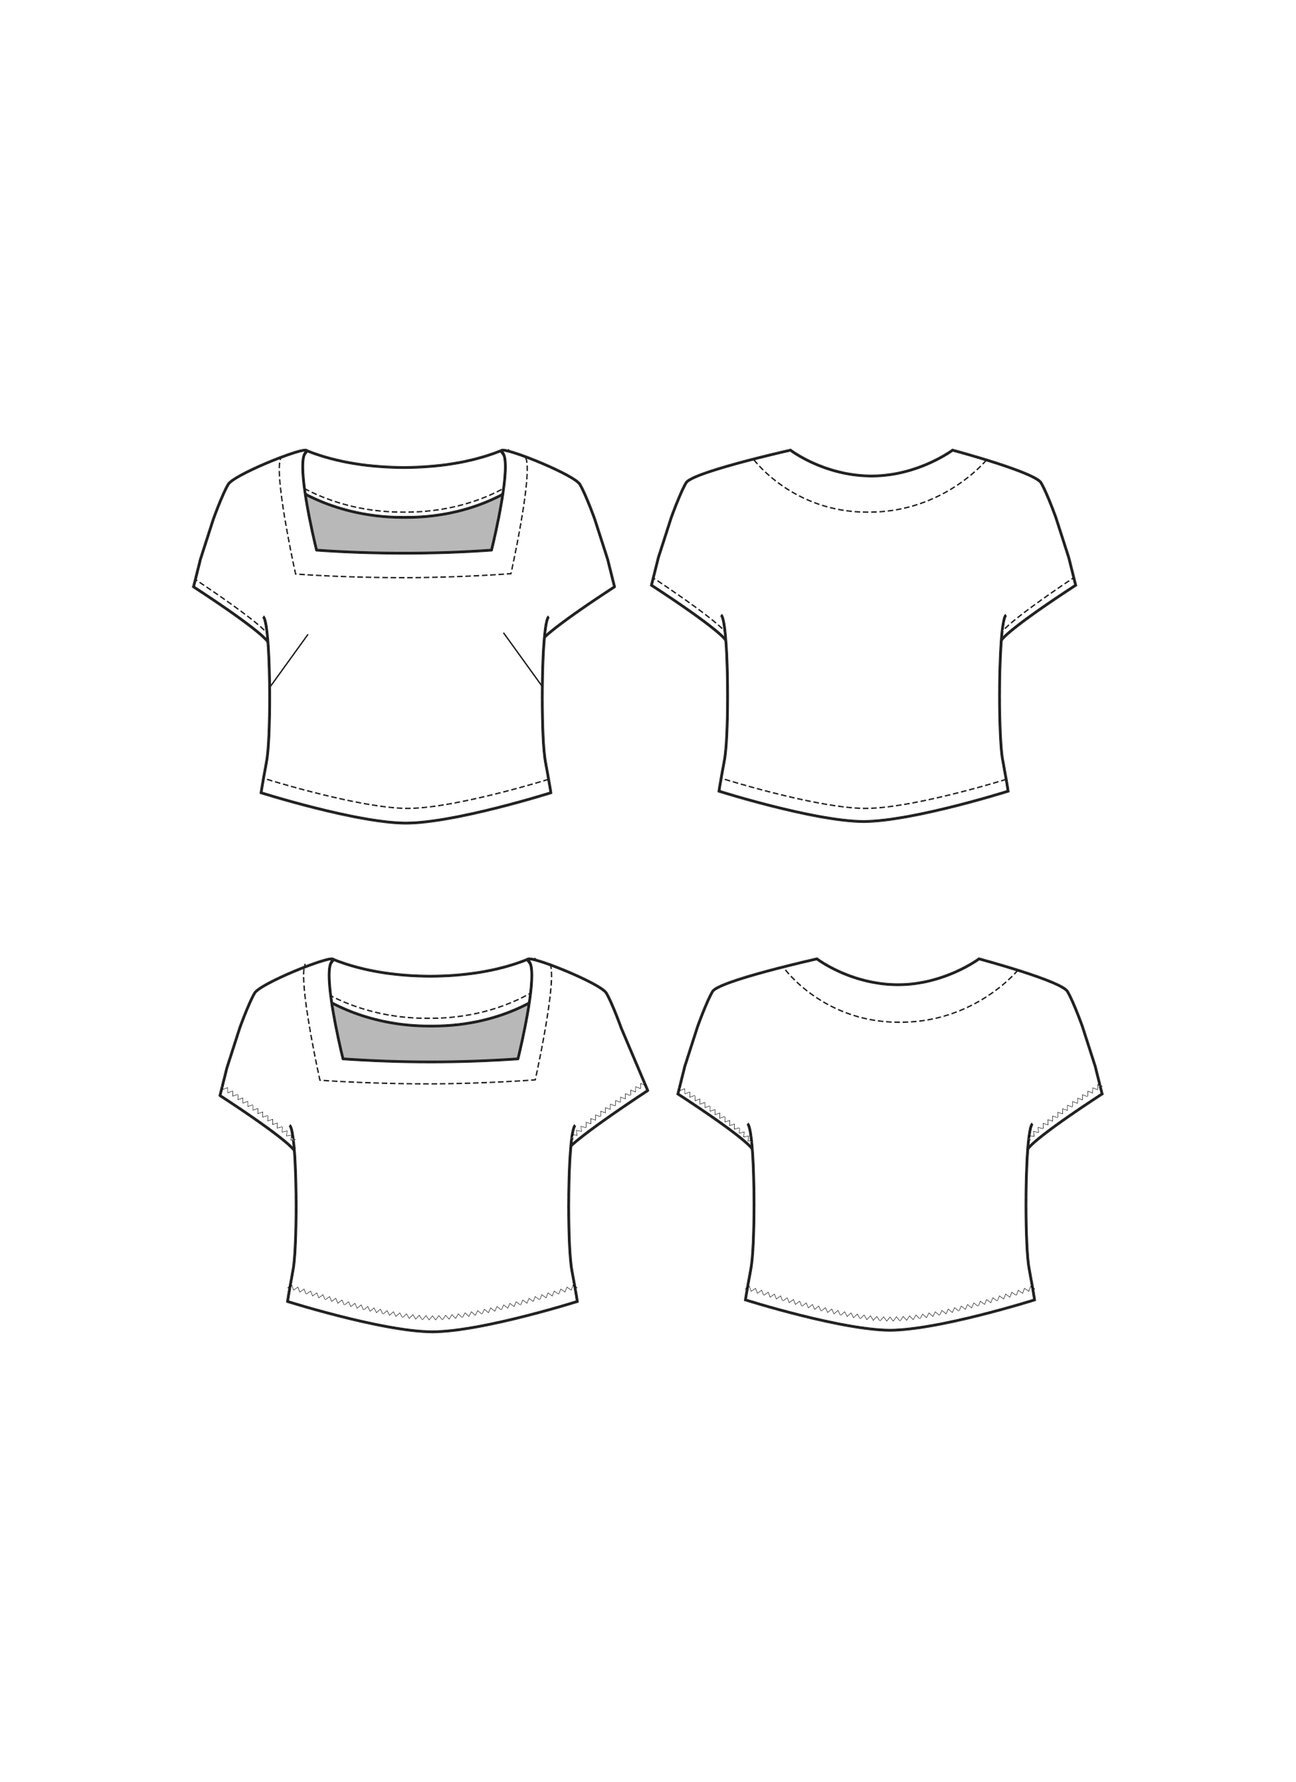 Square-Neck-Top-Updated-9.jpg